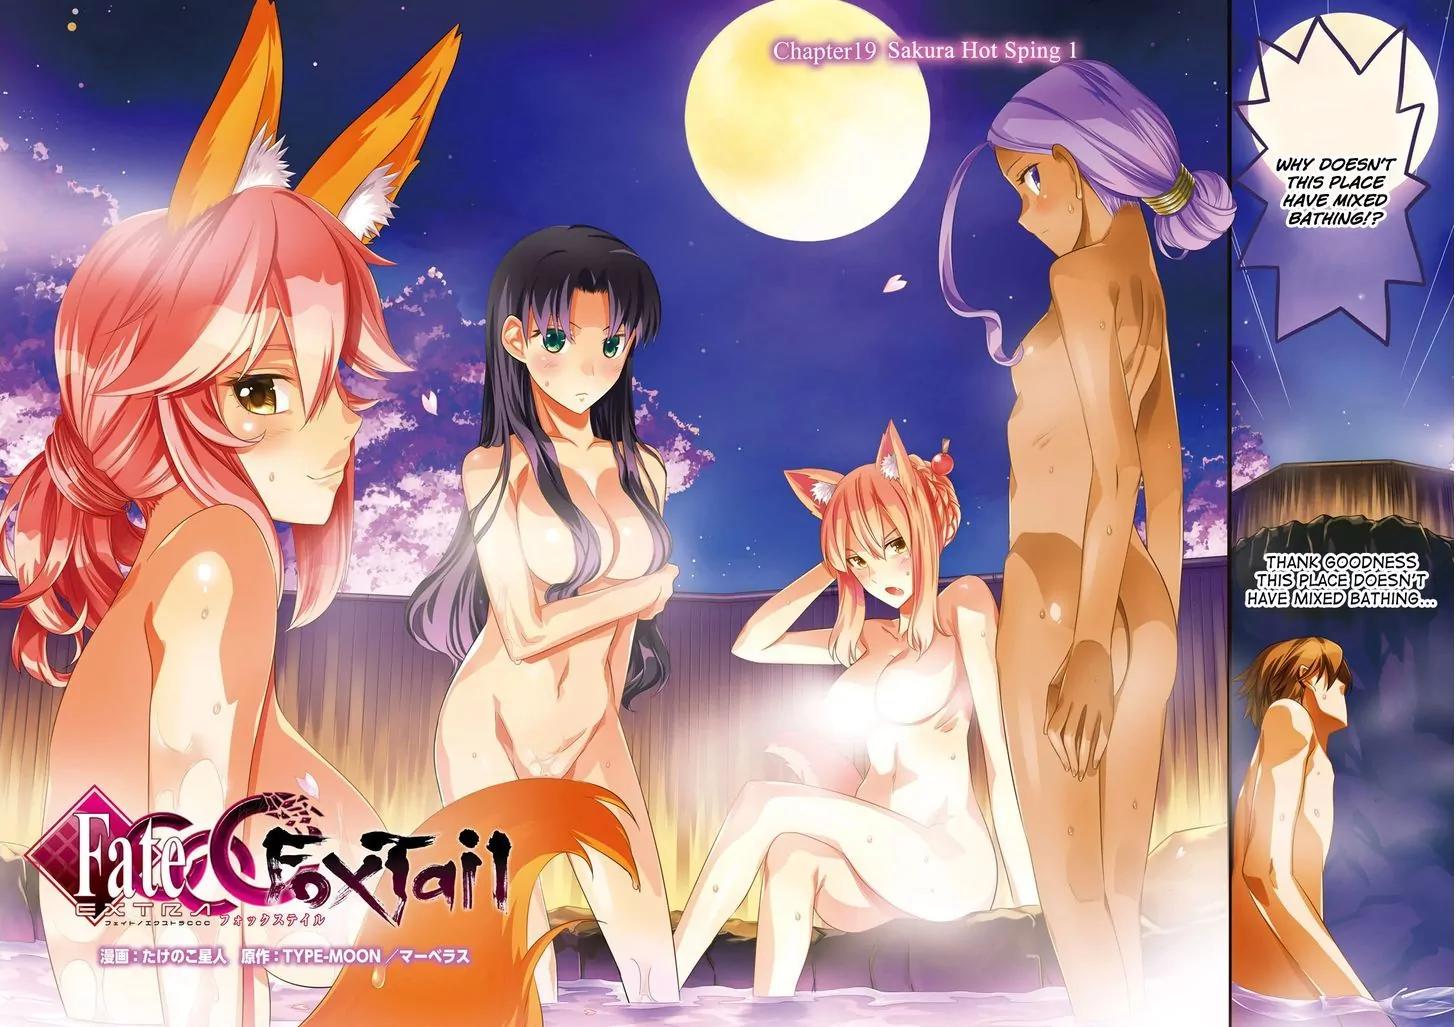 Fate/extra Ccc - Foxtail Chapter 20: Sakura Hot Spring 1 - Picture 2